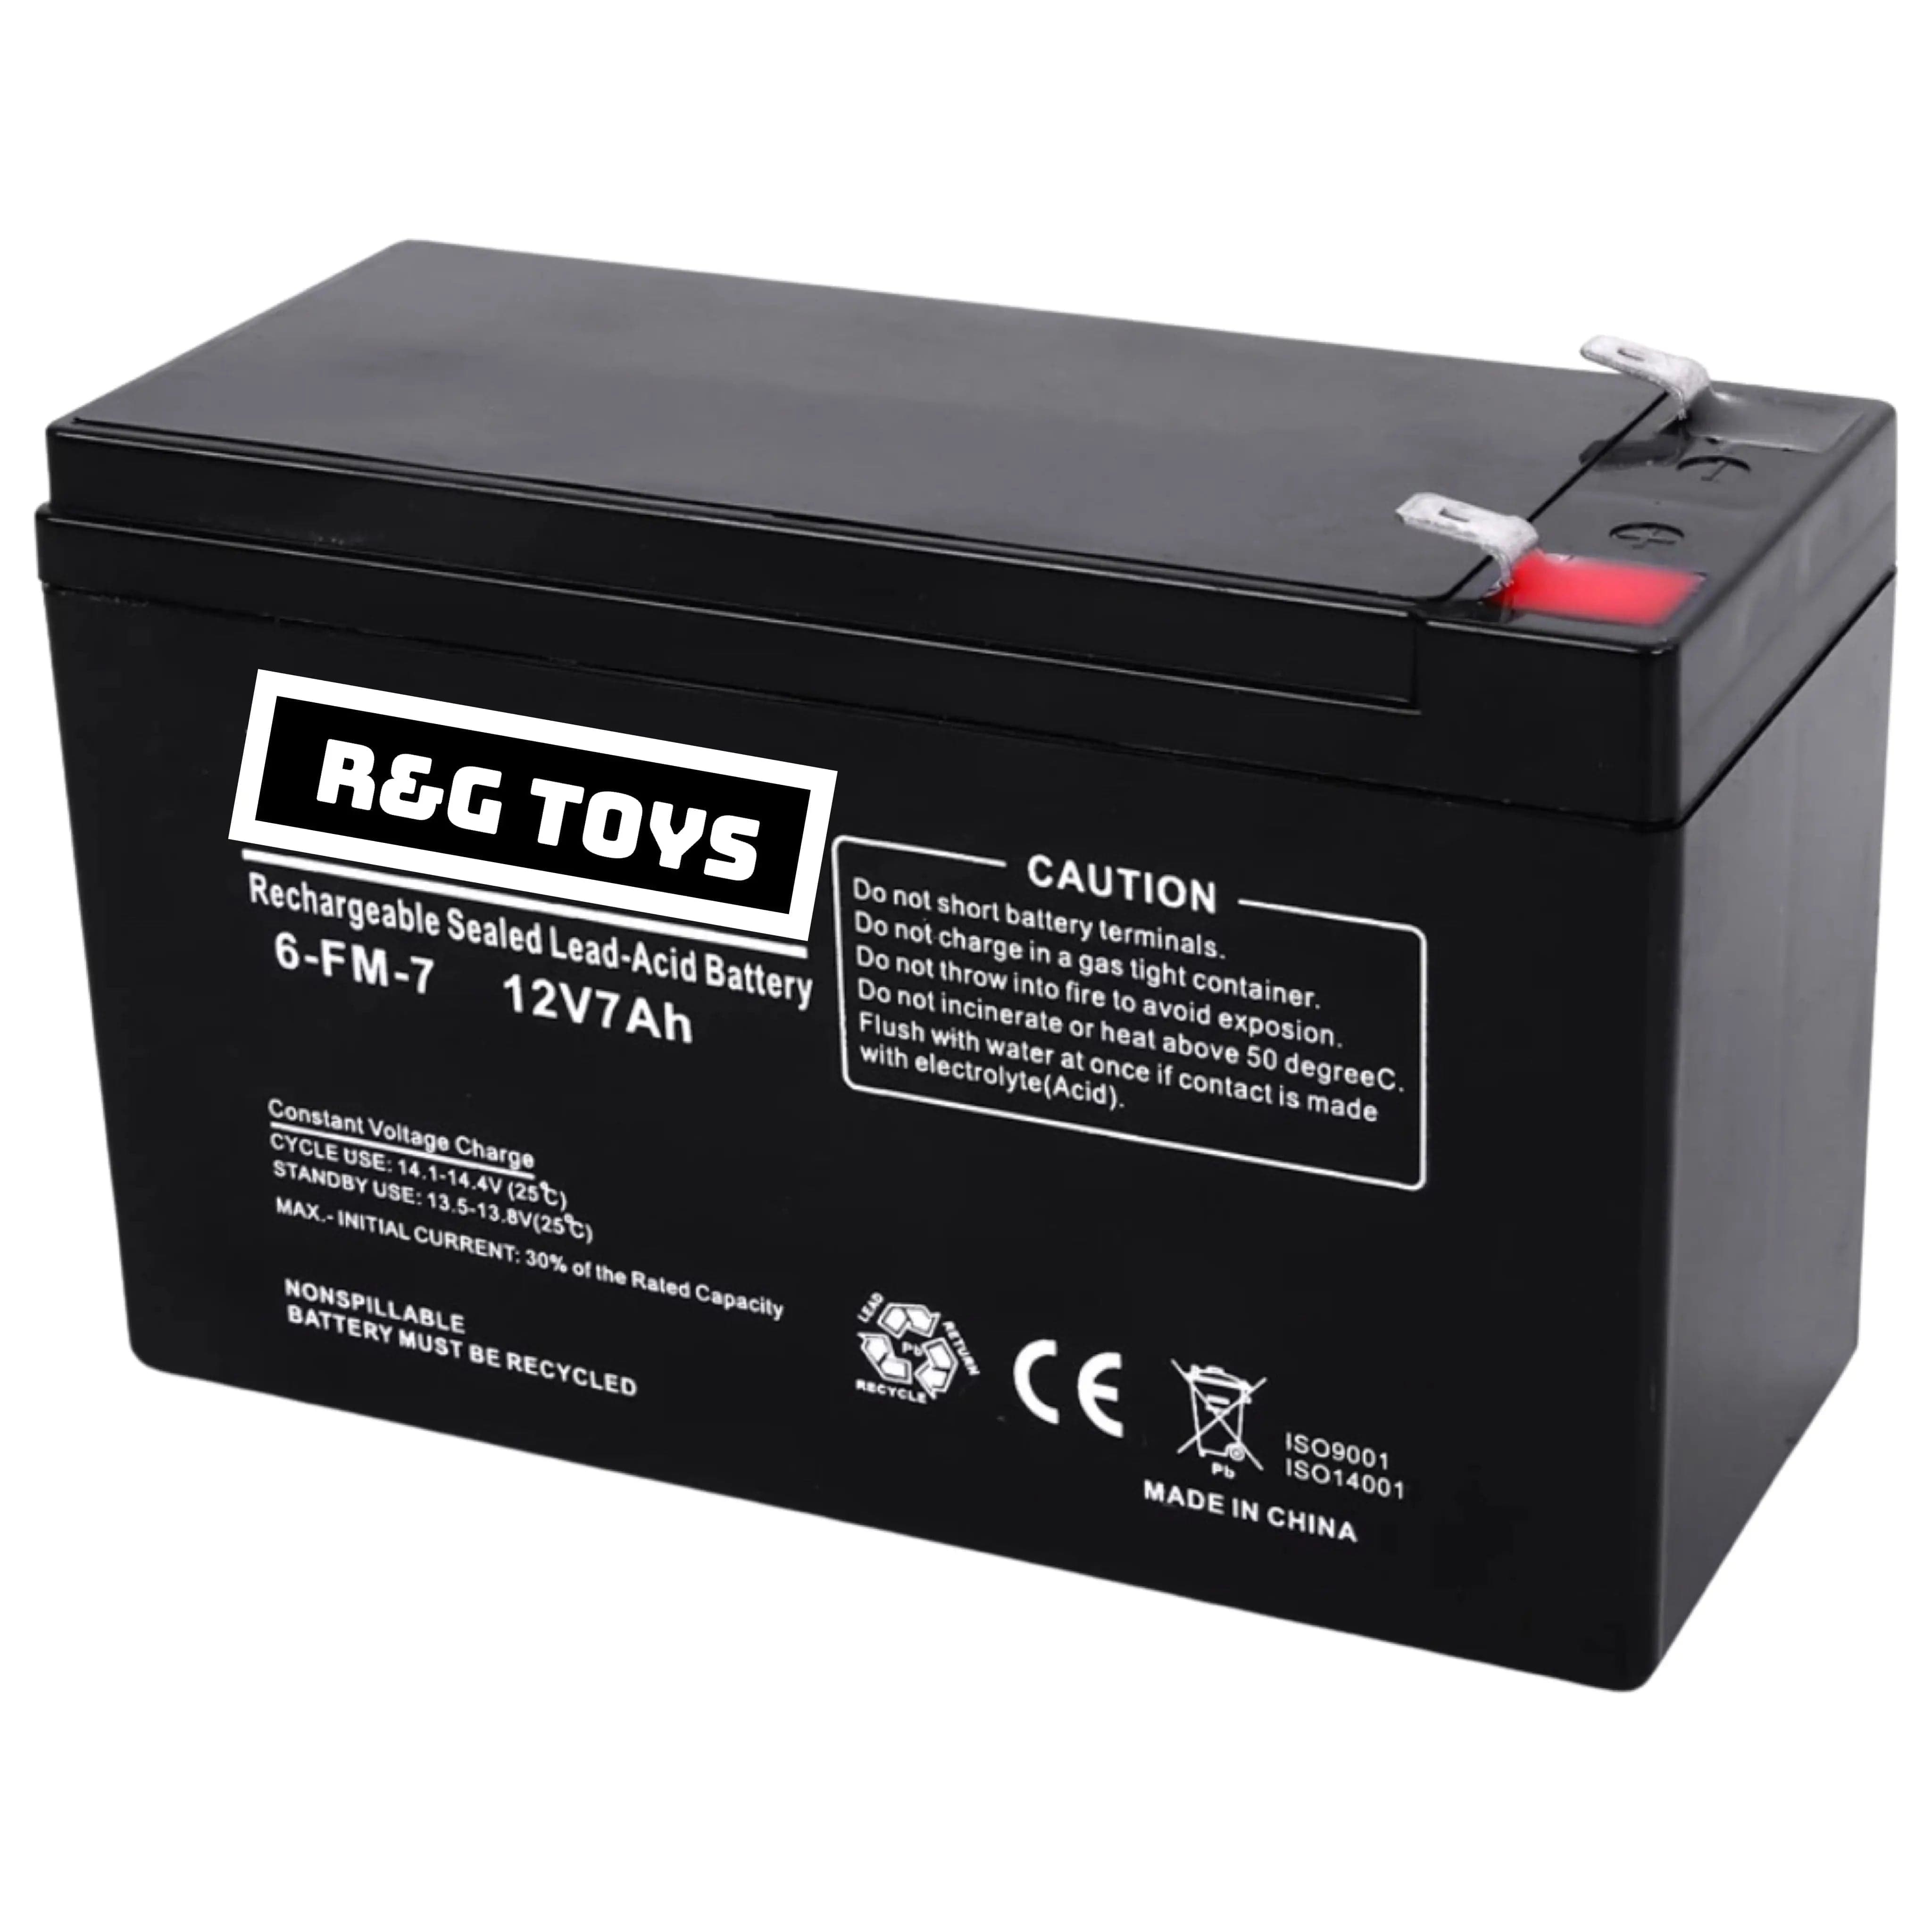 Replacement Battery R&G TOYS